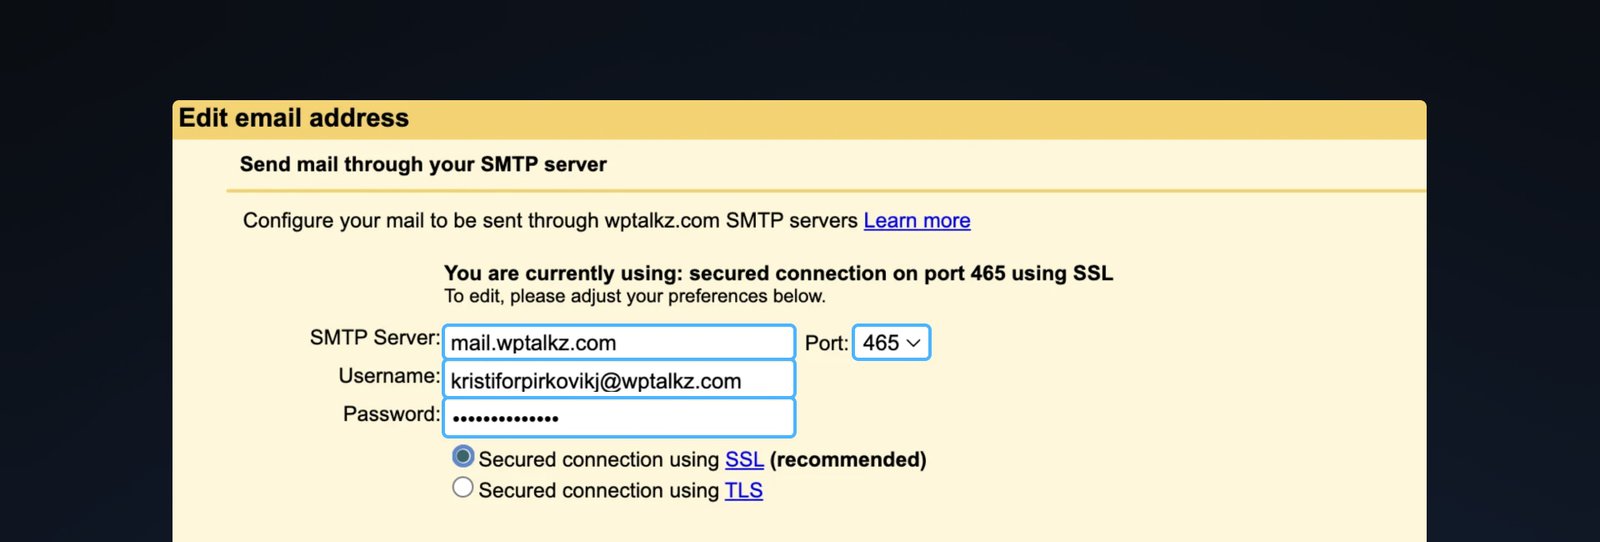 Intergrate SMTP server from Bluehost